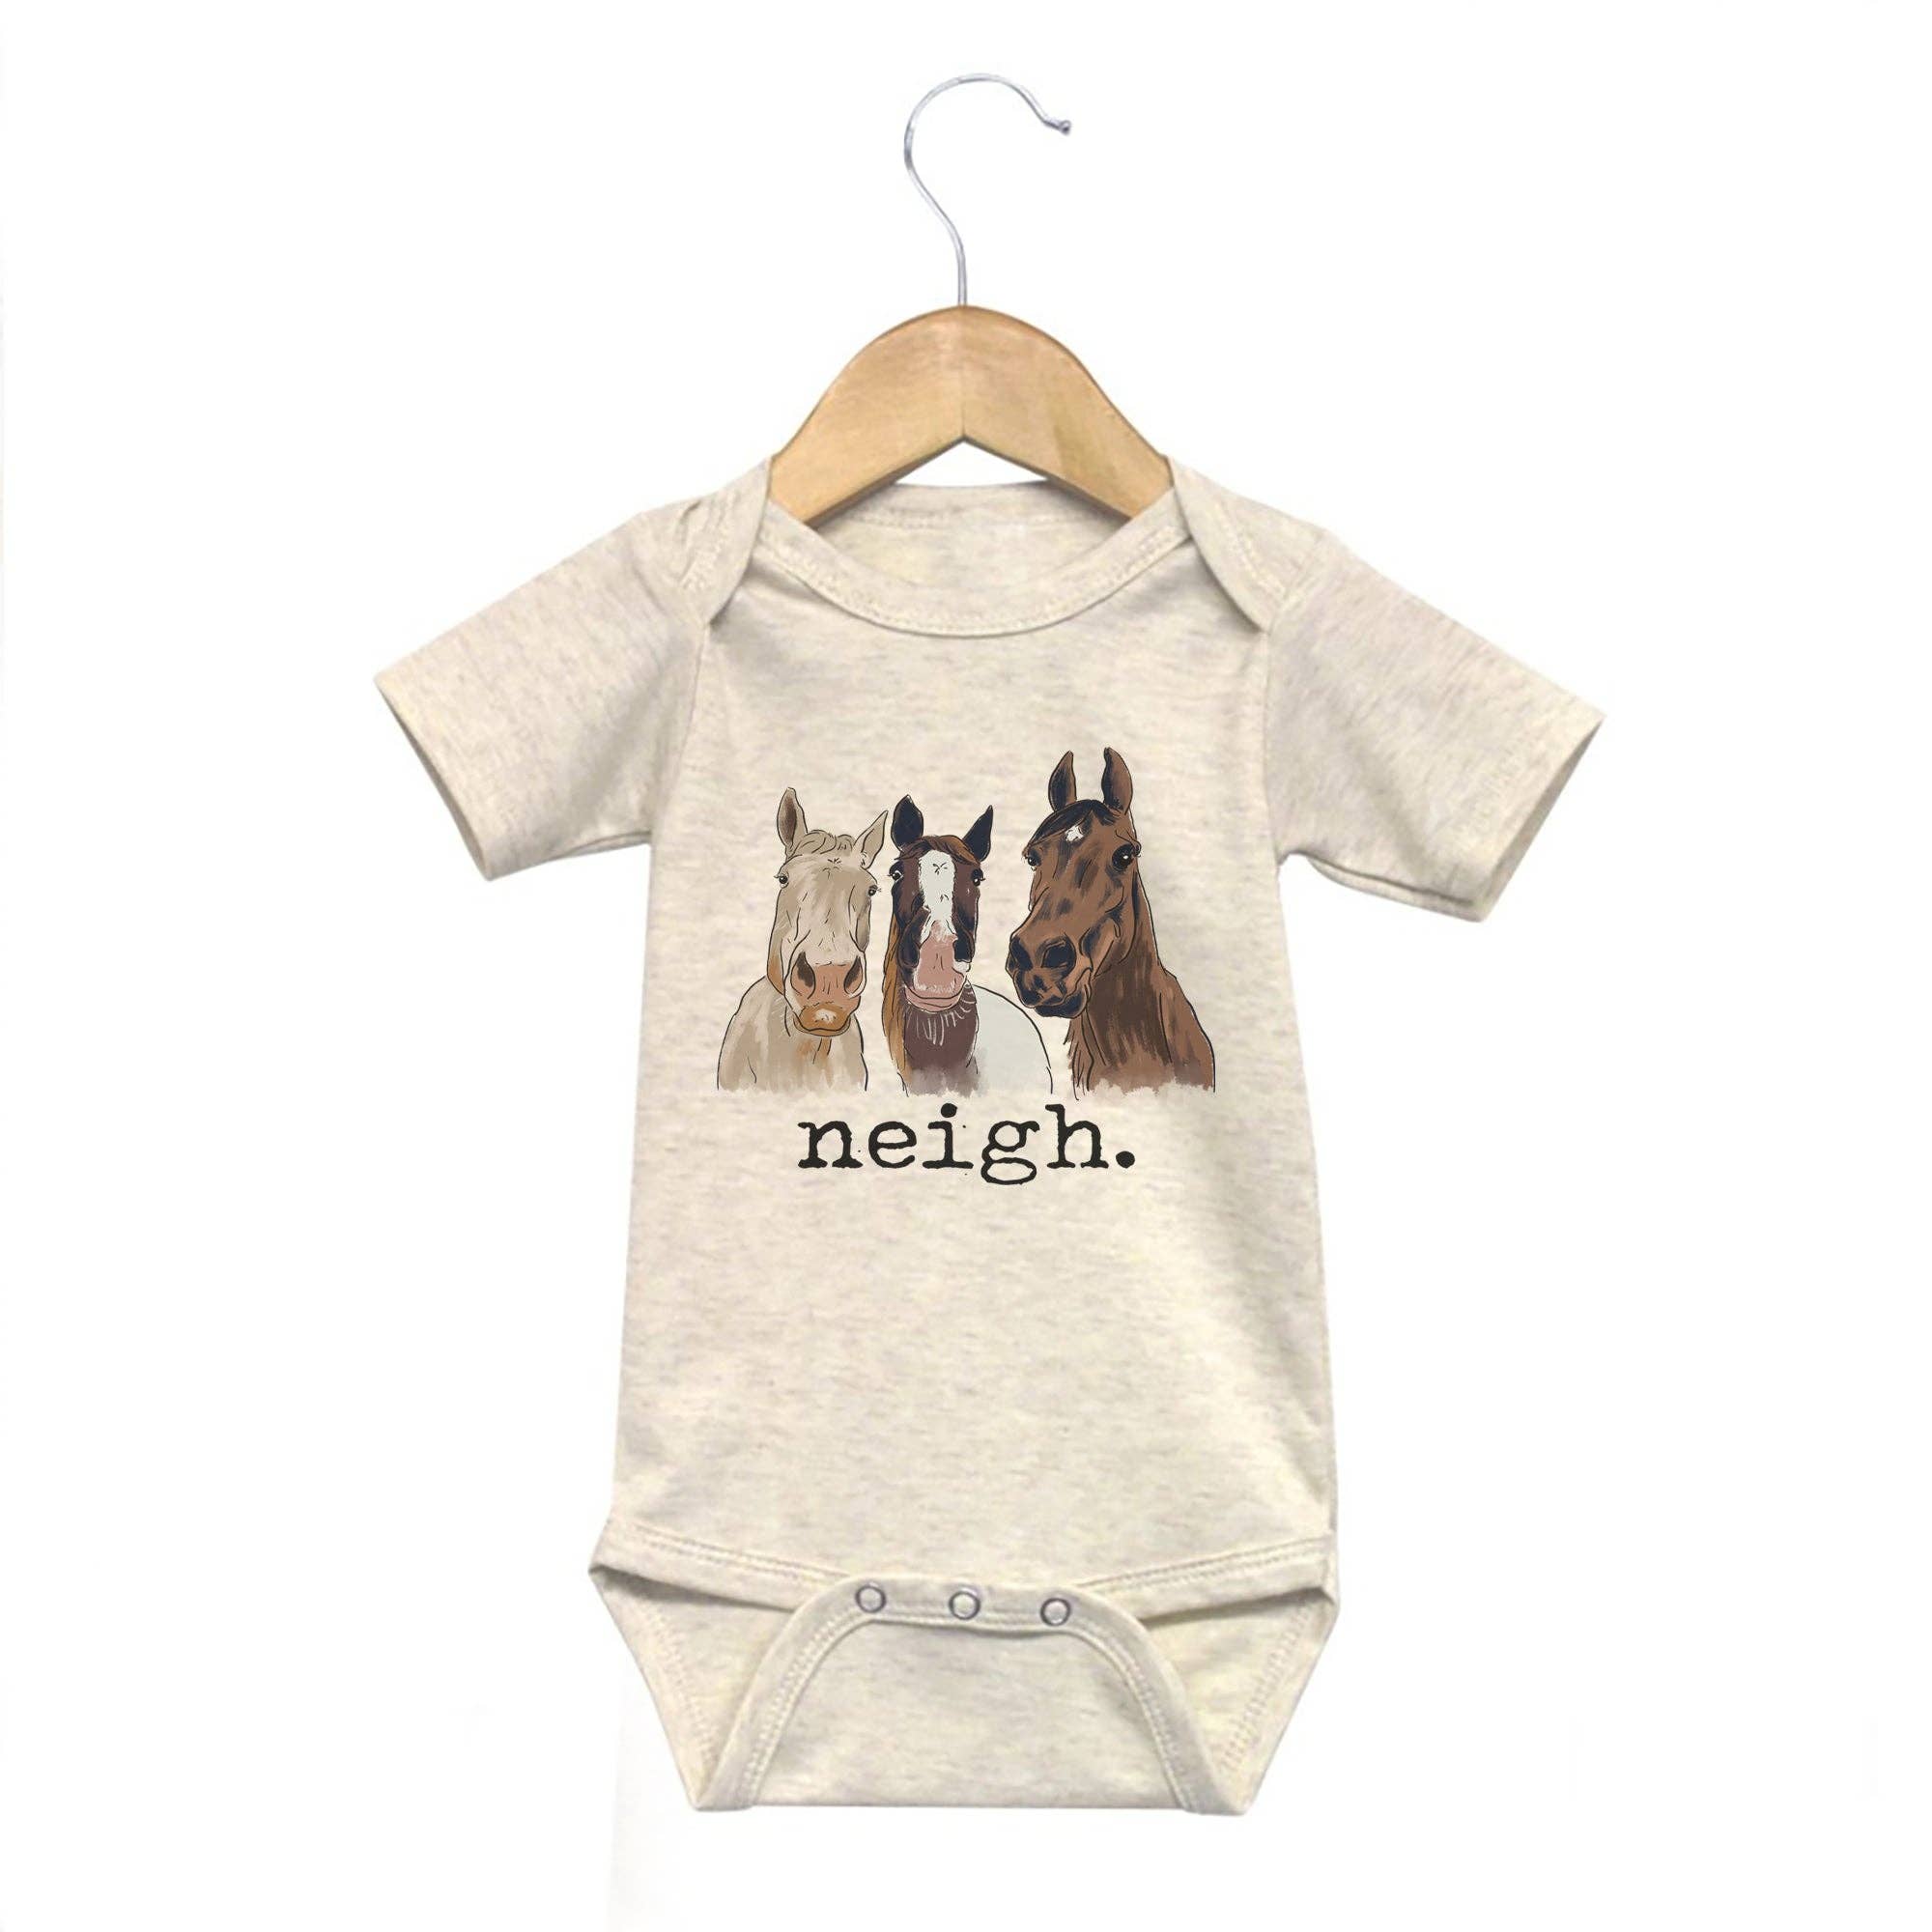 Cream baby bodysuit with the graphic of three horses and the text "neigh."